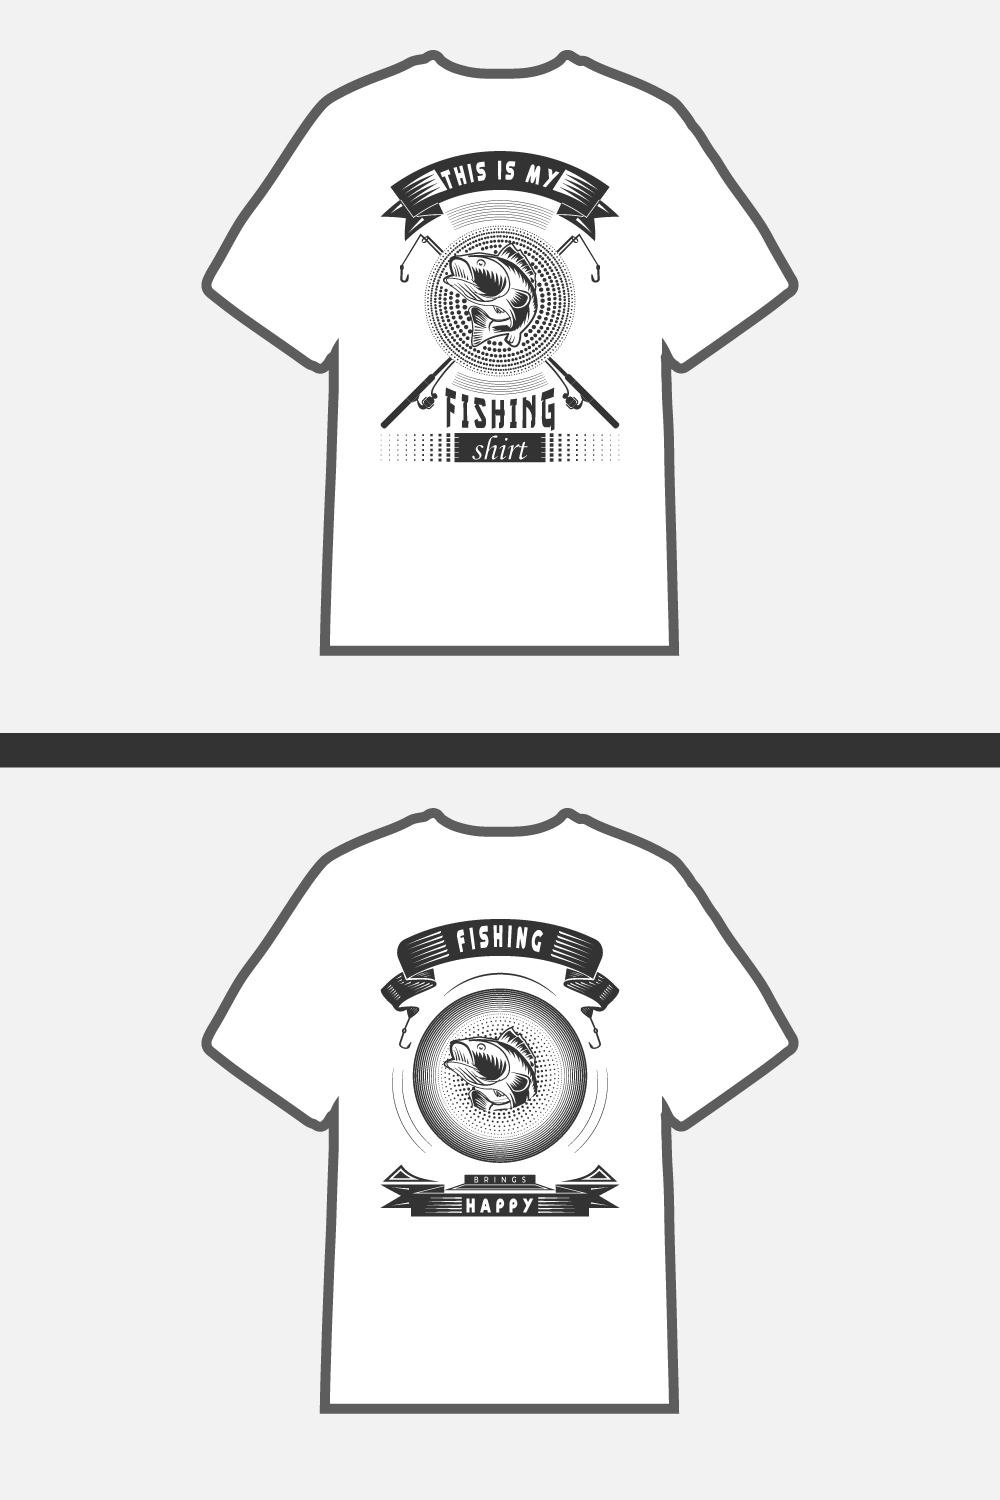 02 fishing t-shirt designs pinterest preview image.